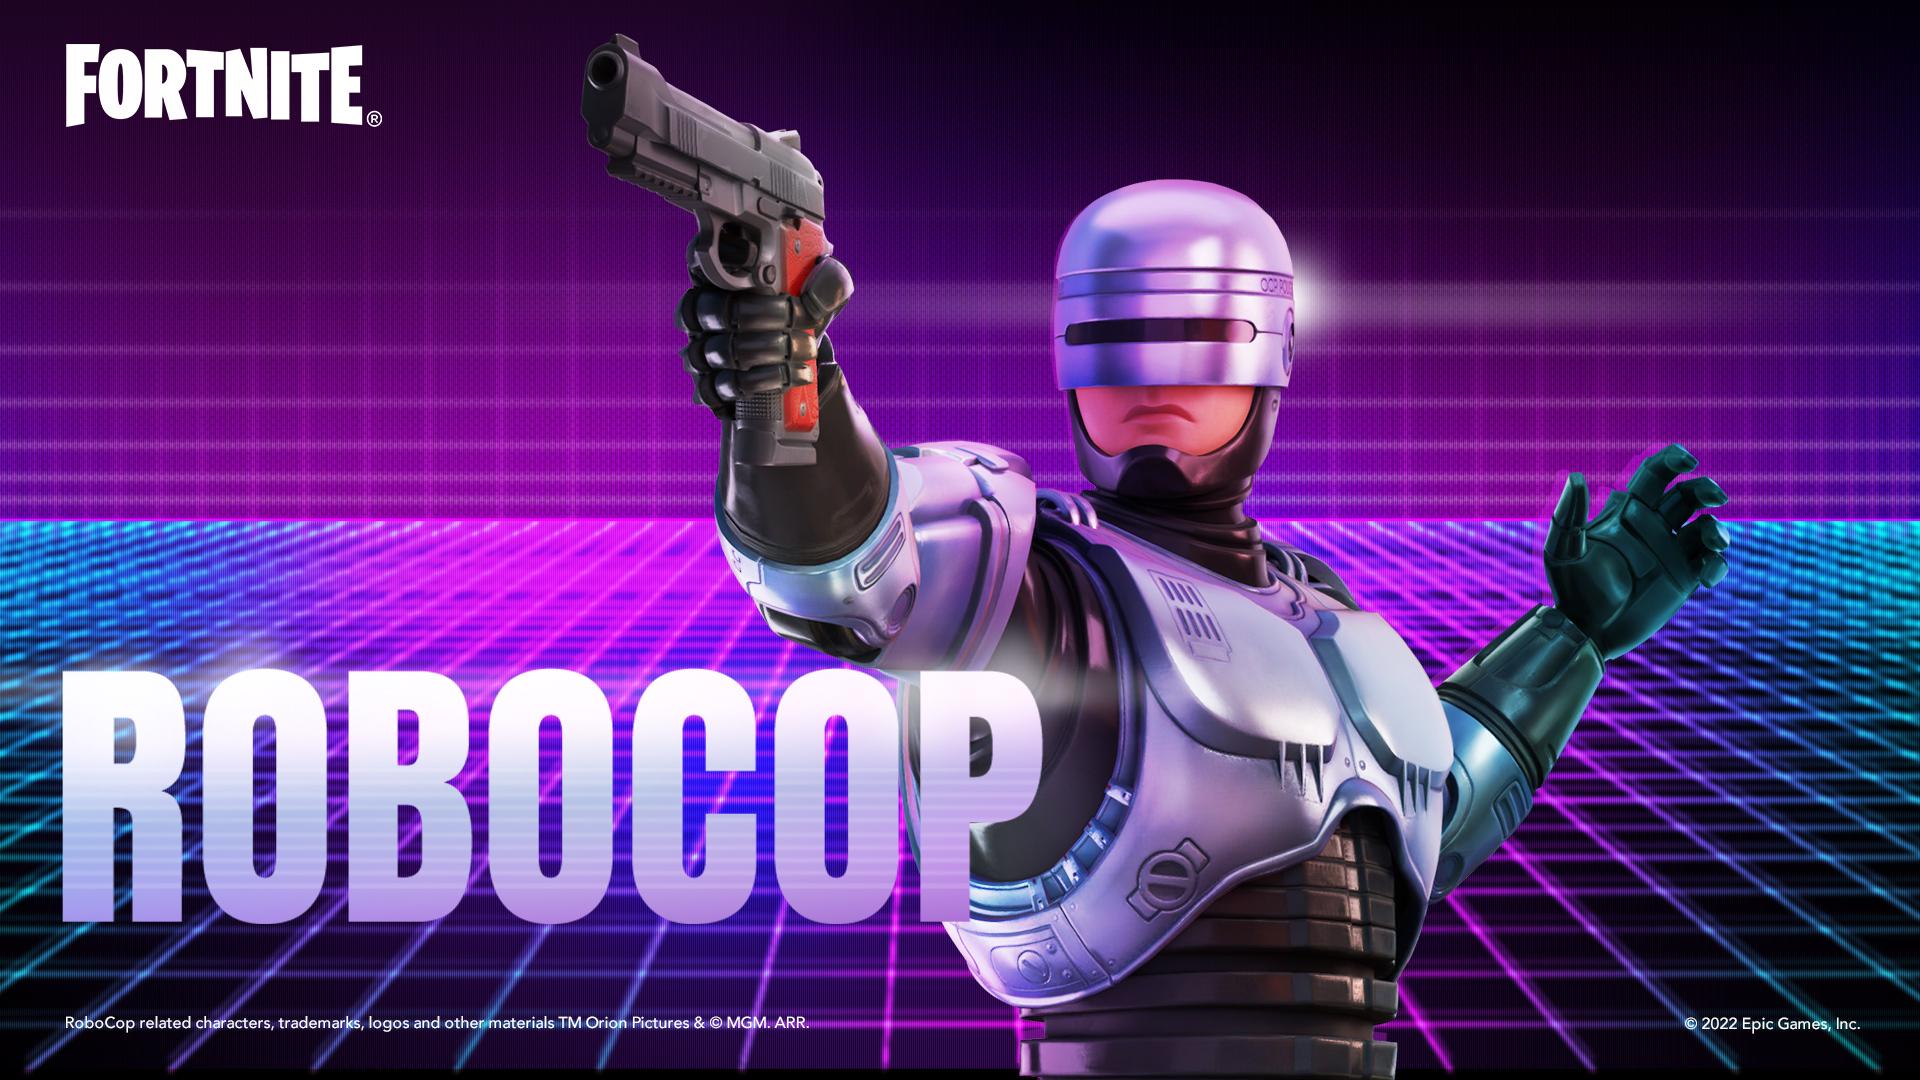 Fortnite adds RoboCop and ED-209 to the battle royale game’s item shop